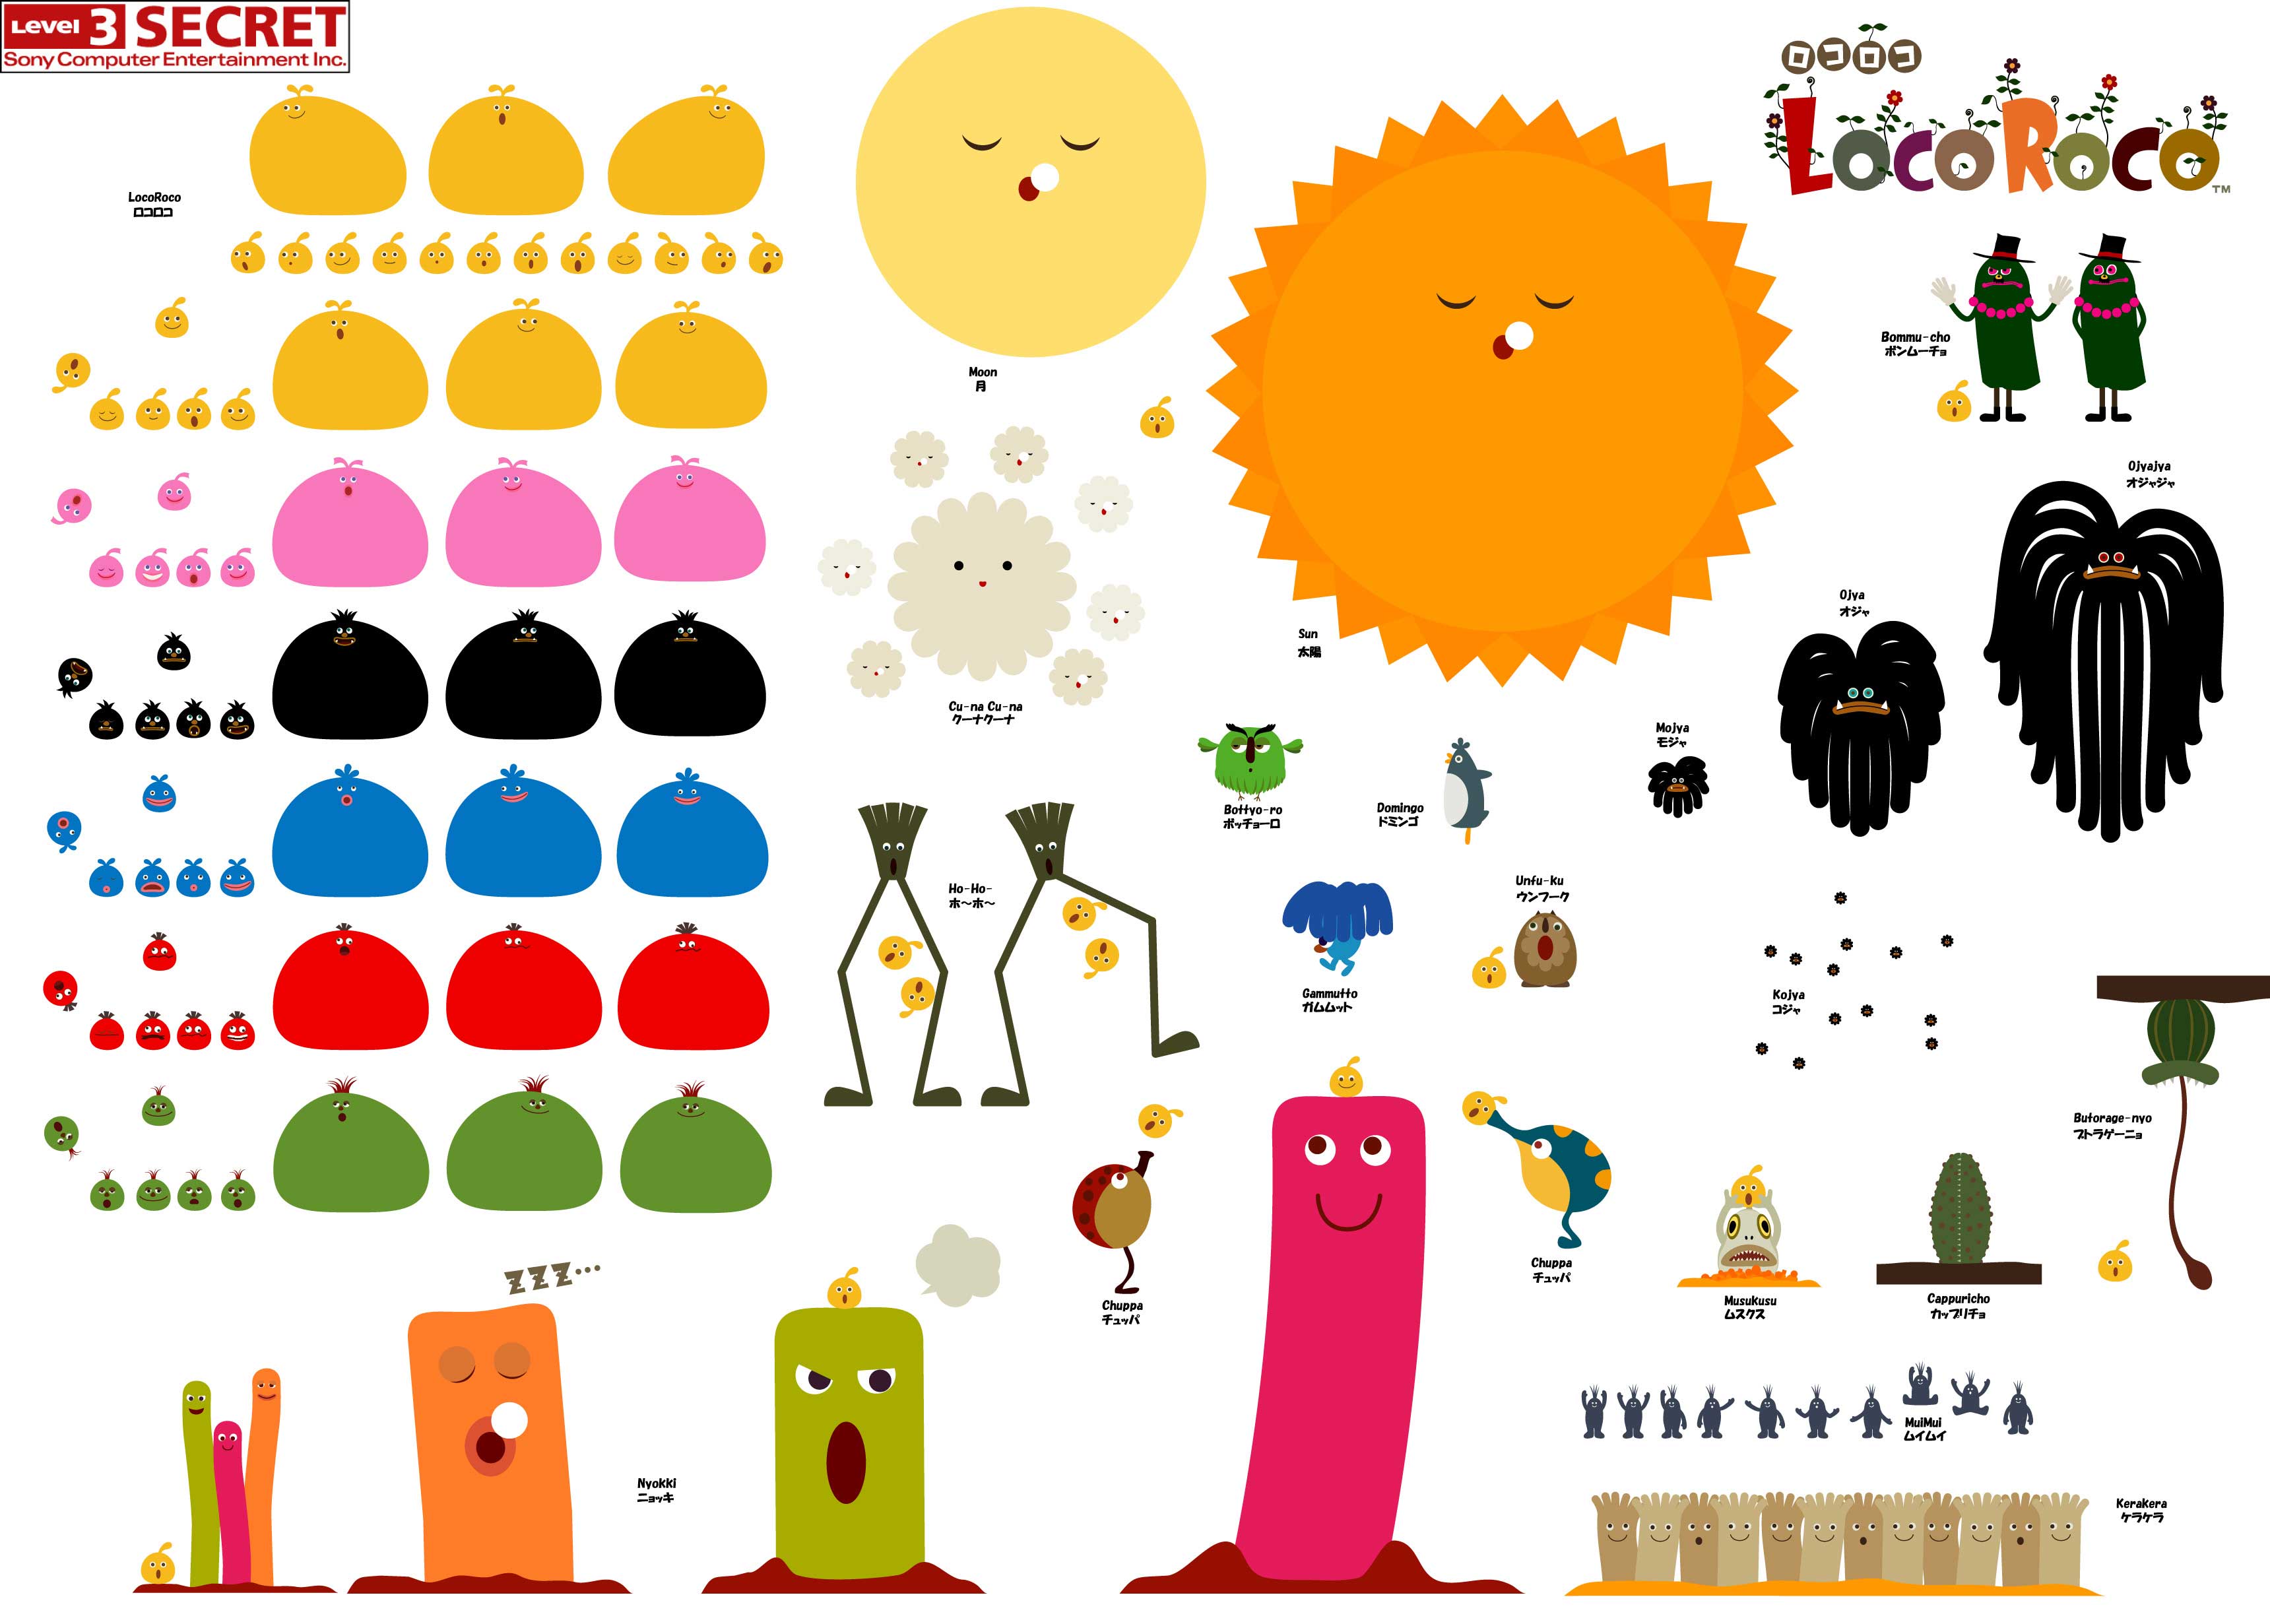 Nice Images Collection: LocoRoco Desktop Wallpapers